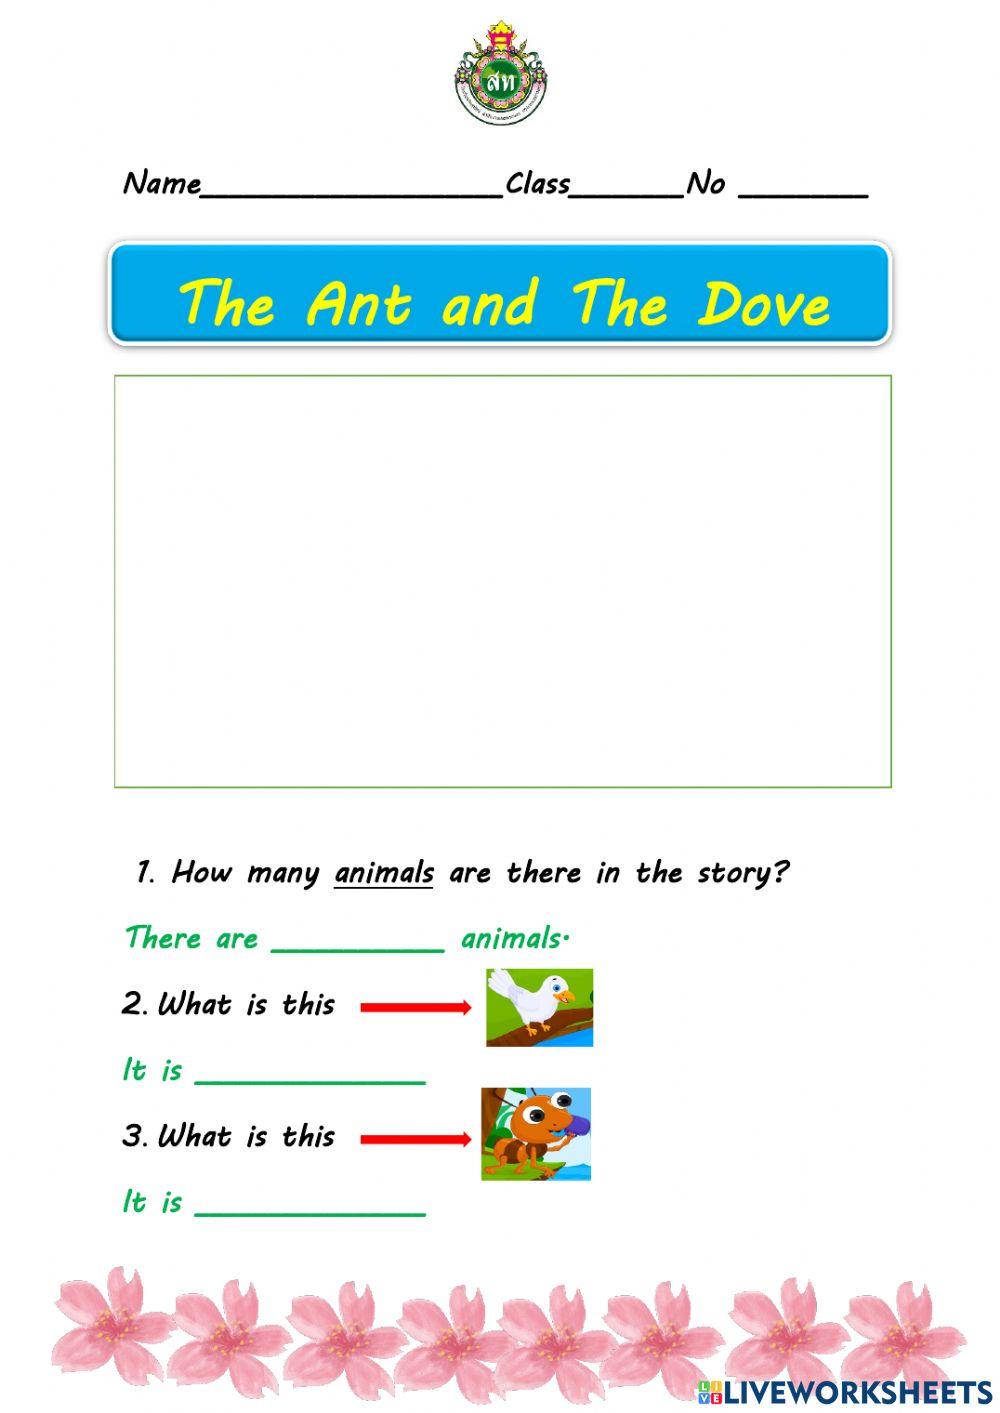 The ant and the dove